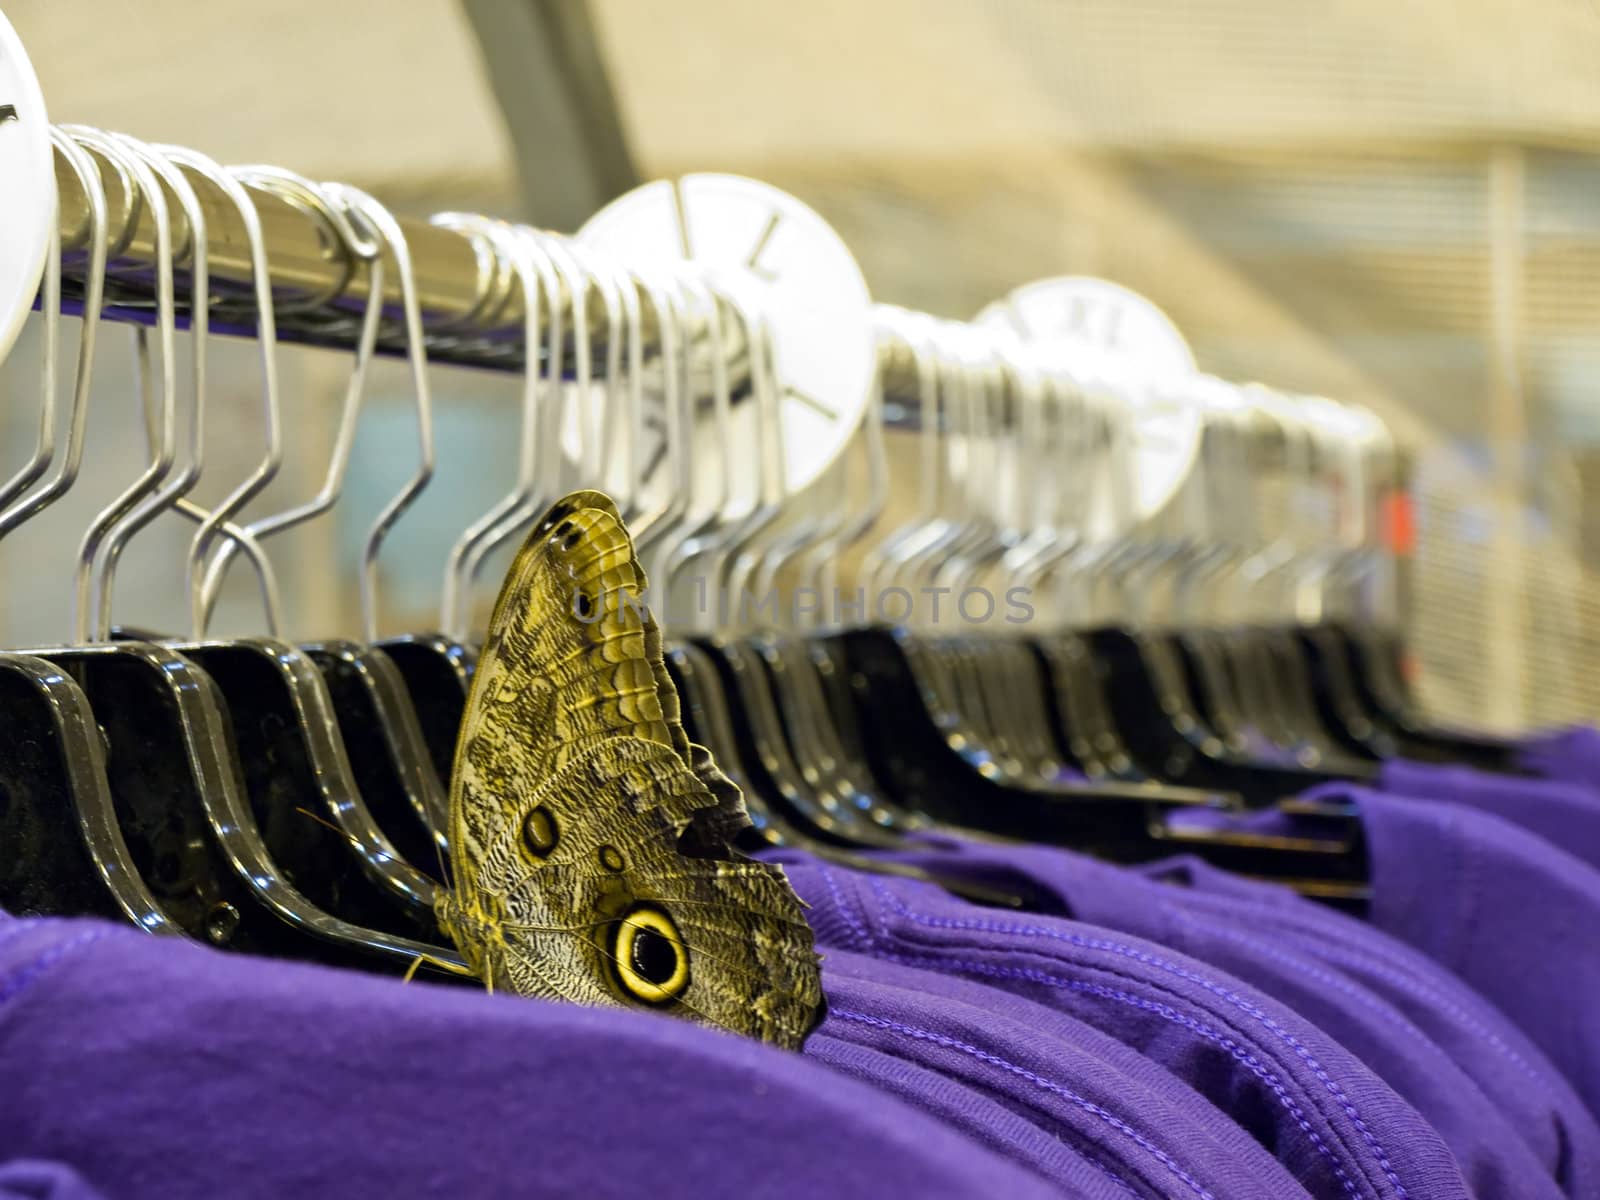 Butterfly on Clothing Rack by watamyr